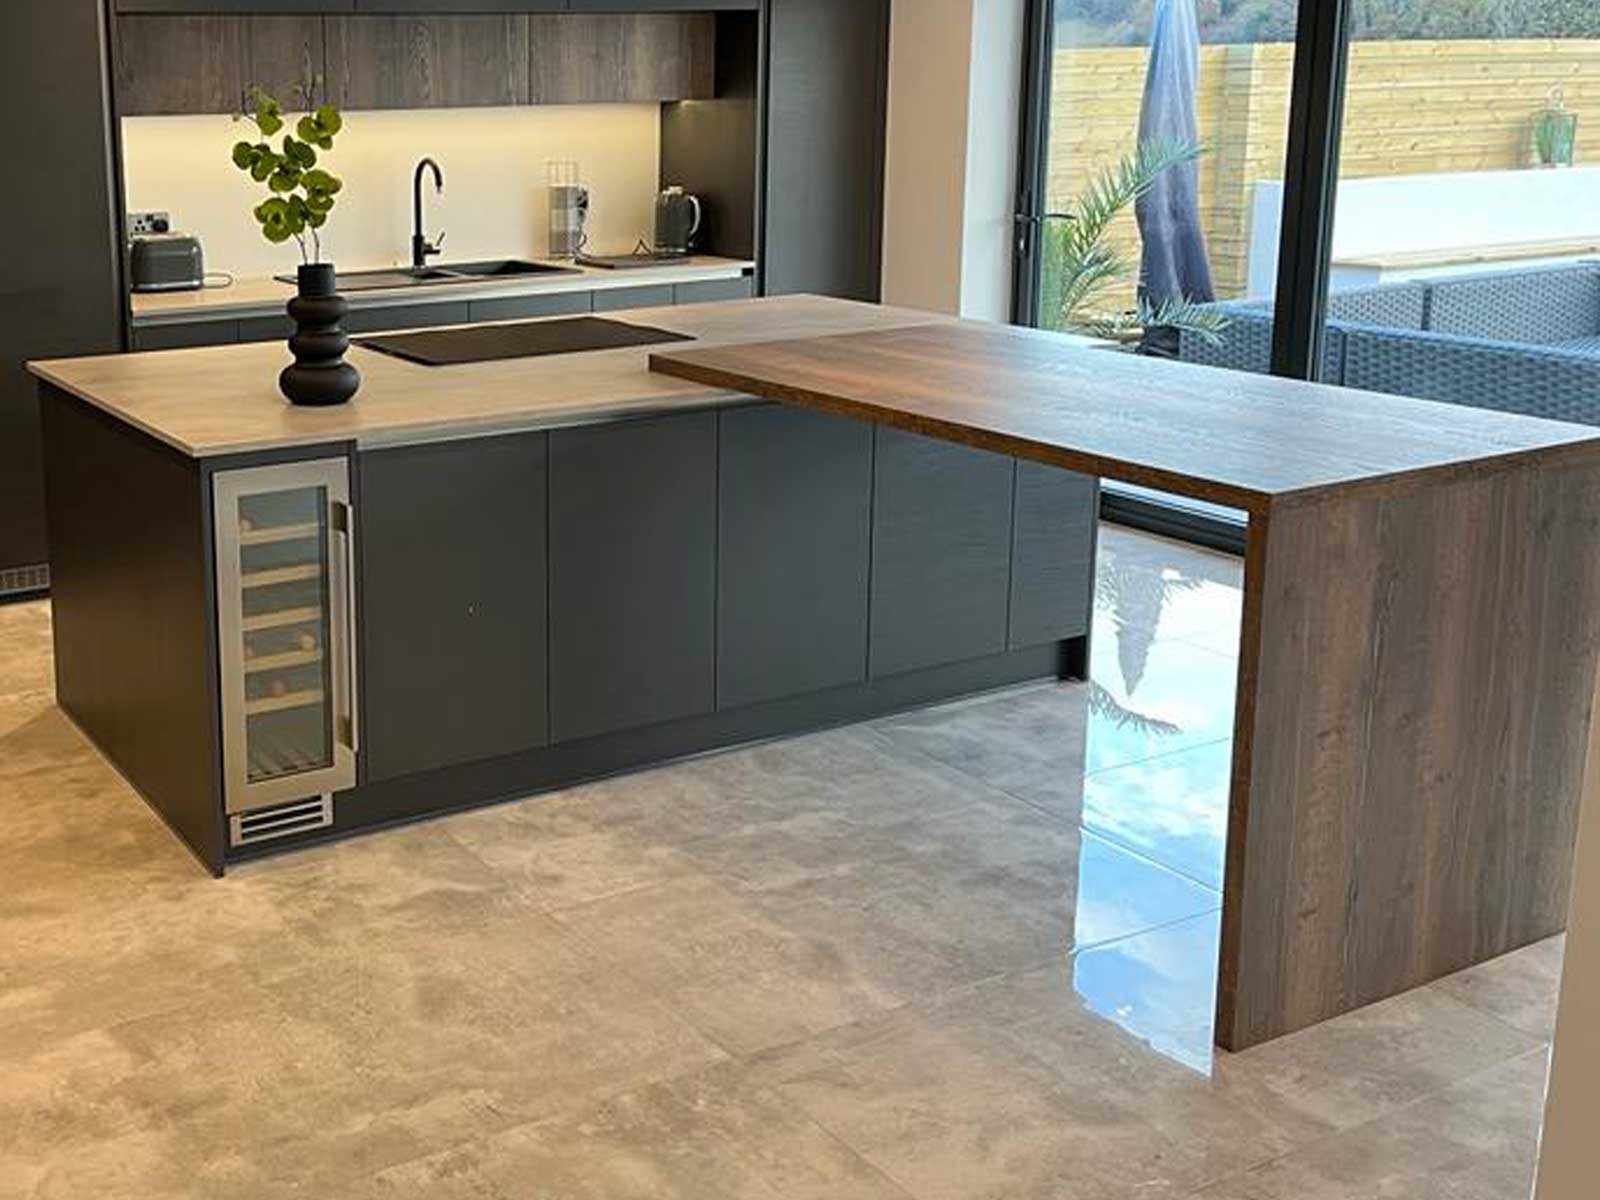 A breakfast bar unit attached as a kitchen peninsula to a kitchen island